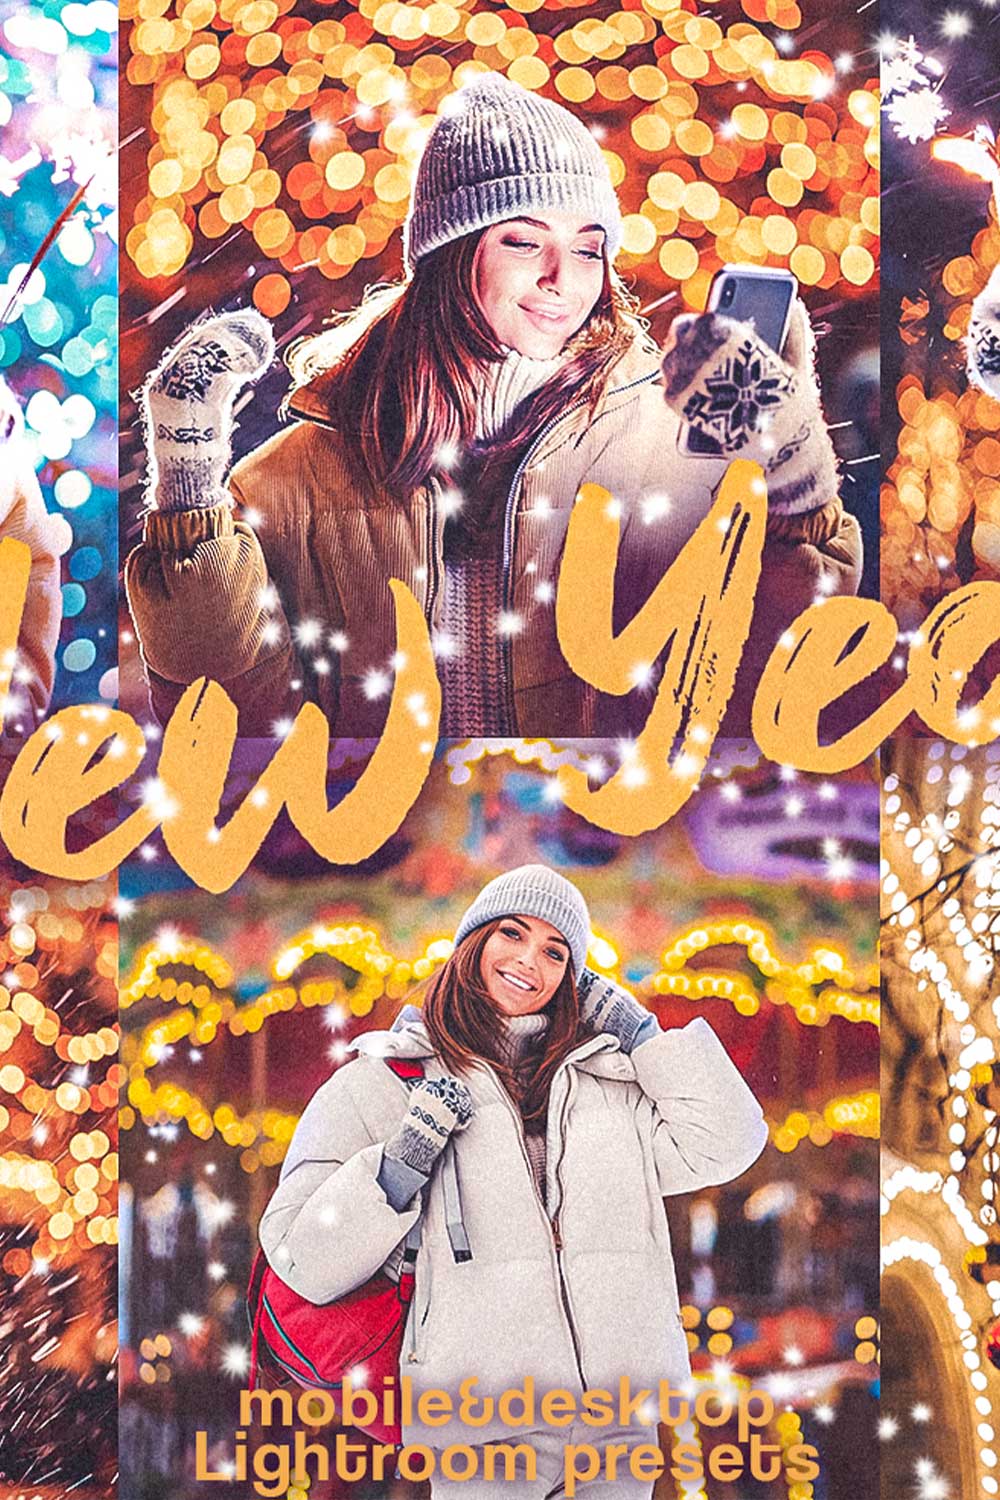 New Year And Christmas Winter Lightroom Presets Pinterest Image.